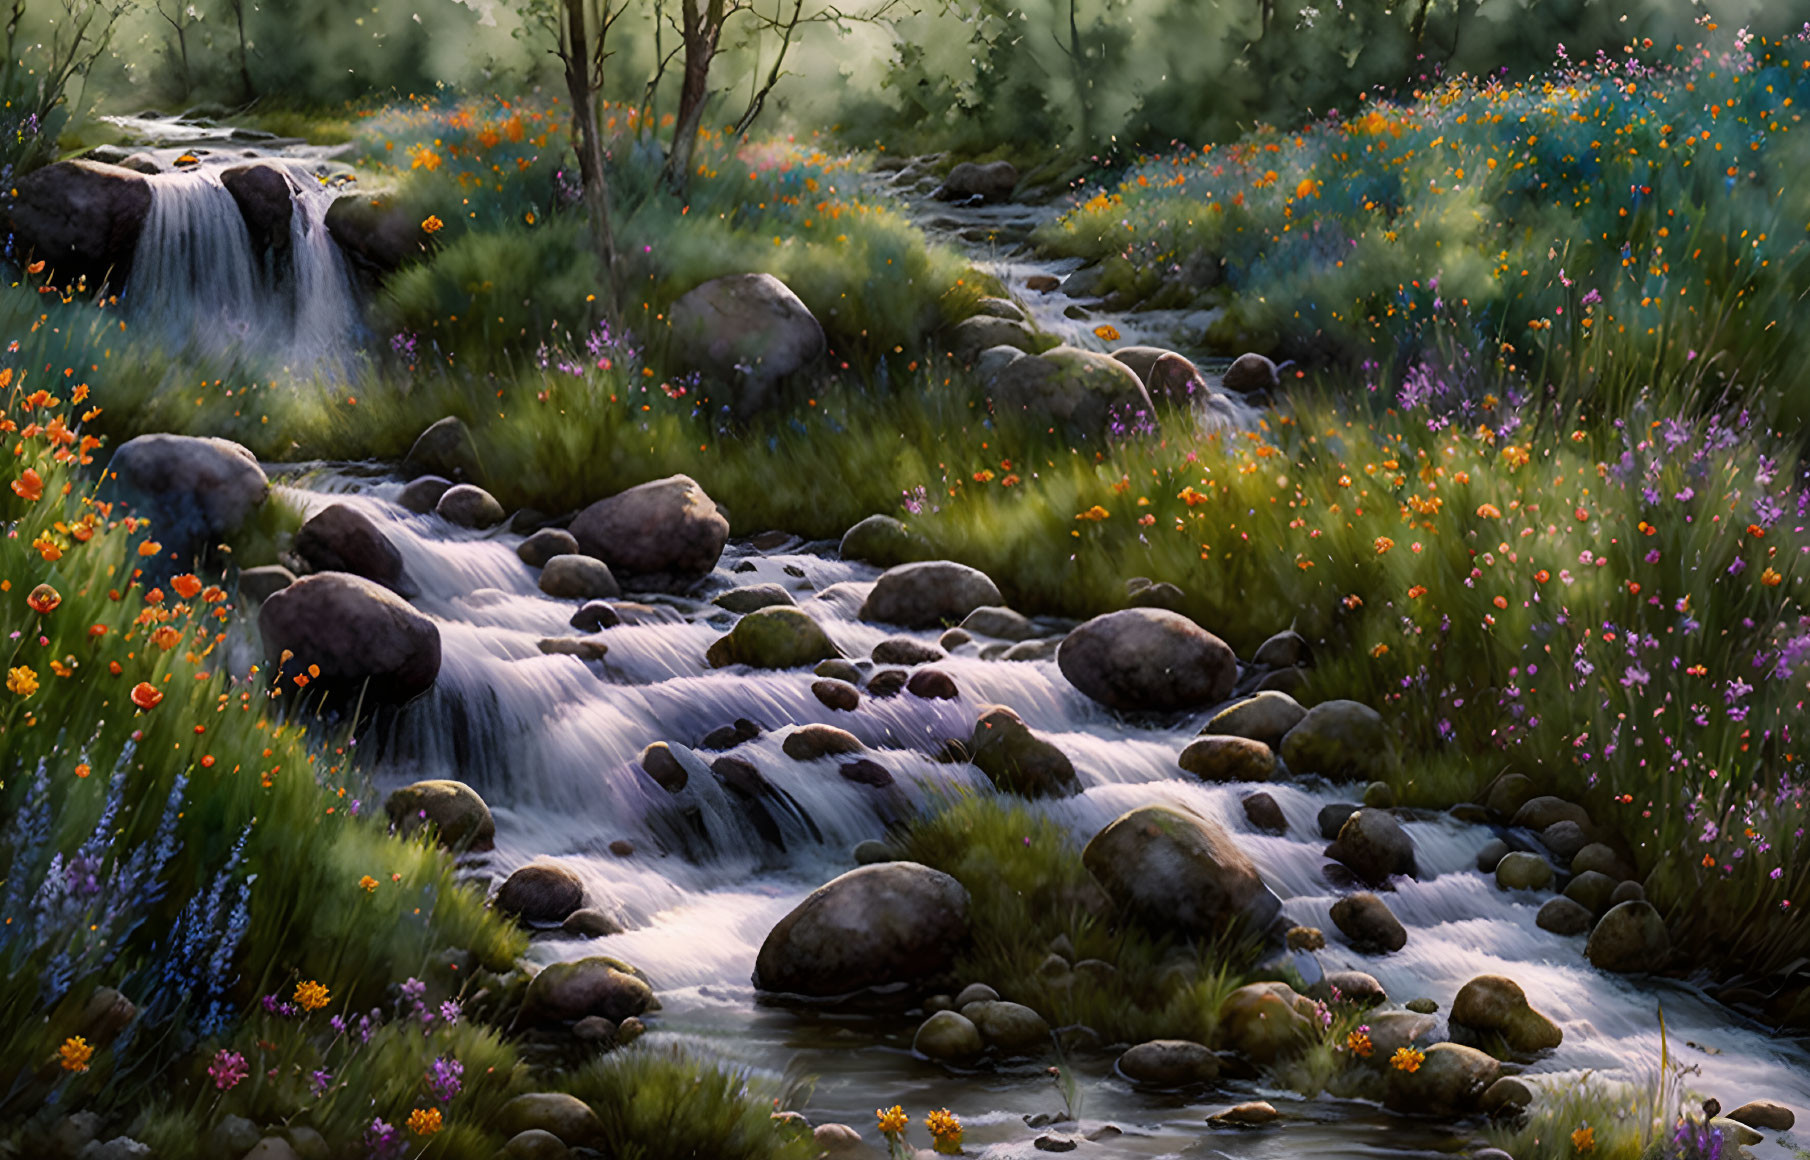 Wild flowers on the banks of a stream